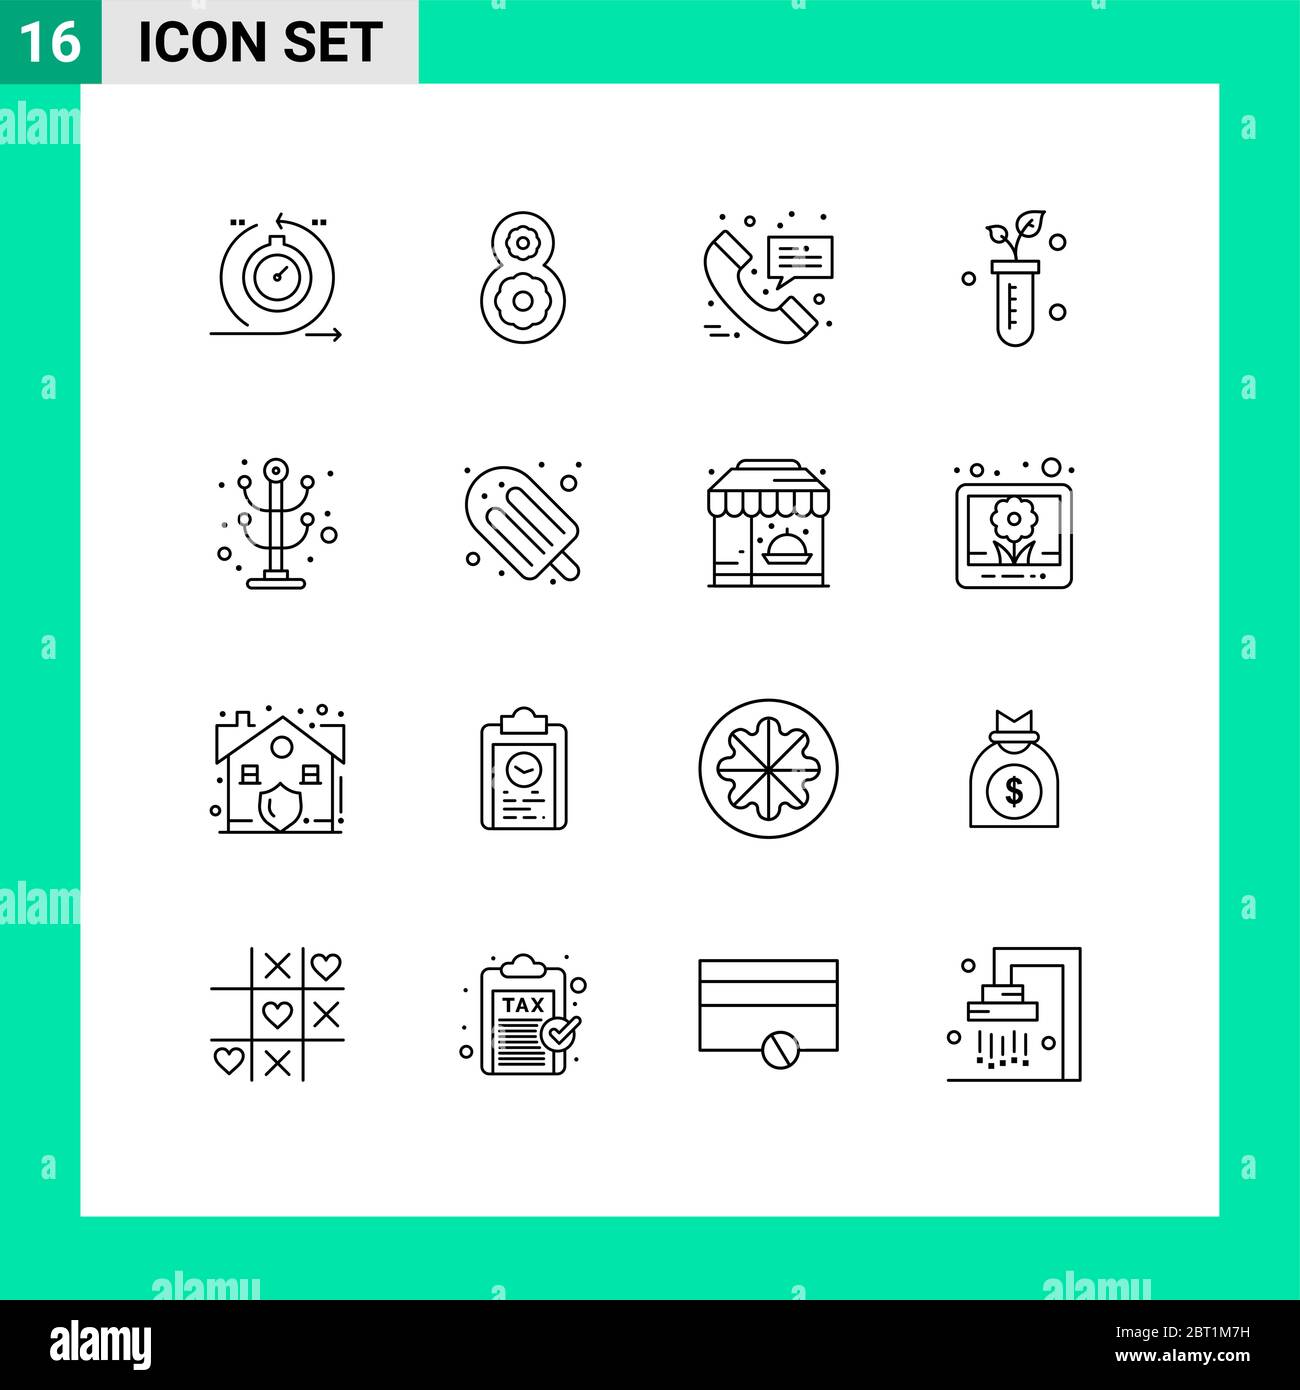 16 Universal Outline Signs Symbols of furniture, science, call, lab, tube Editable Vector Design Elements Stock Vector